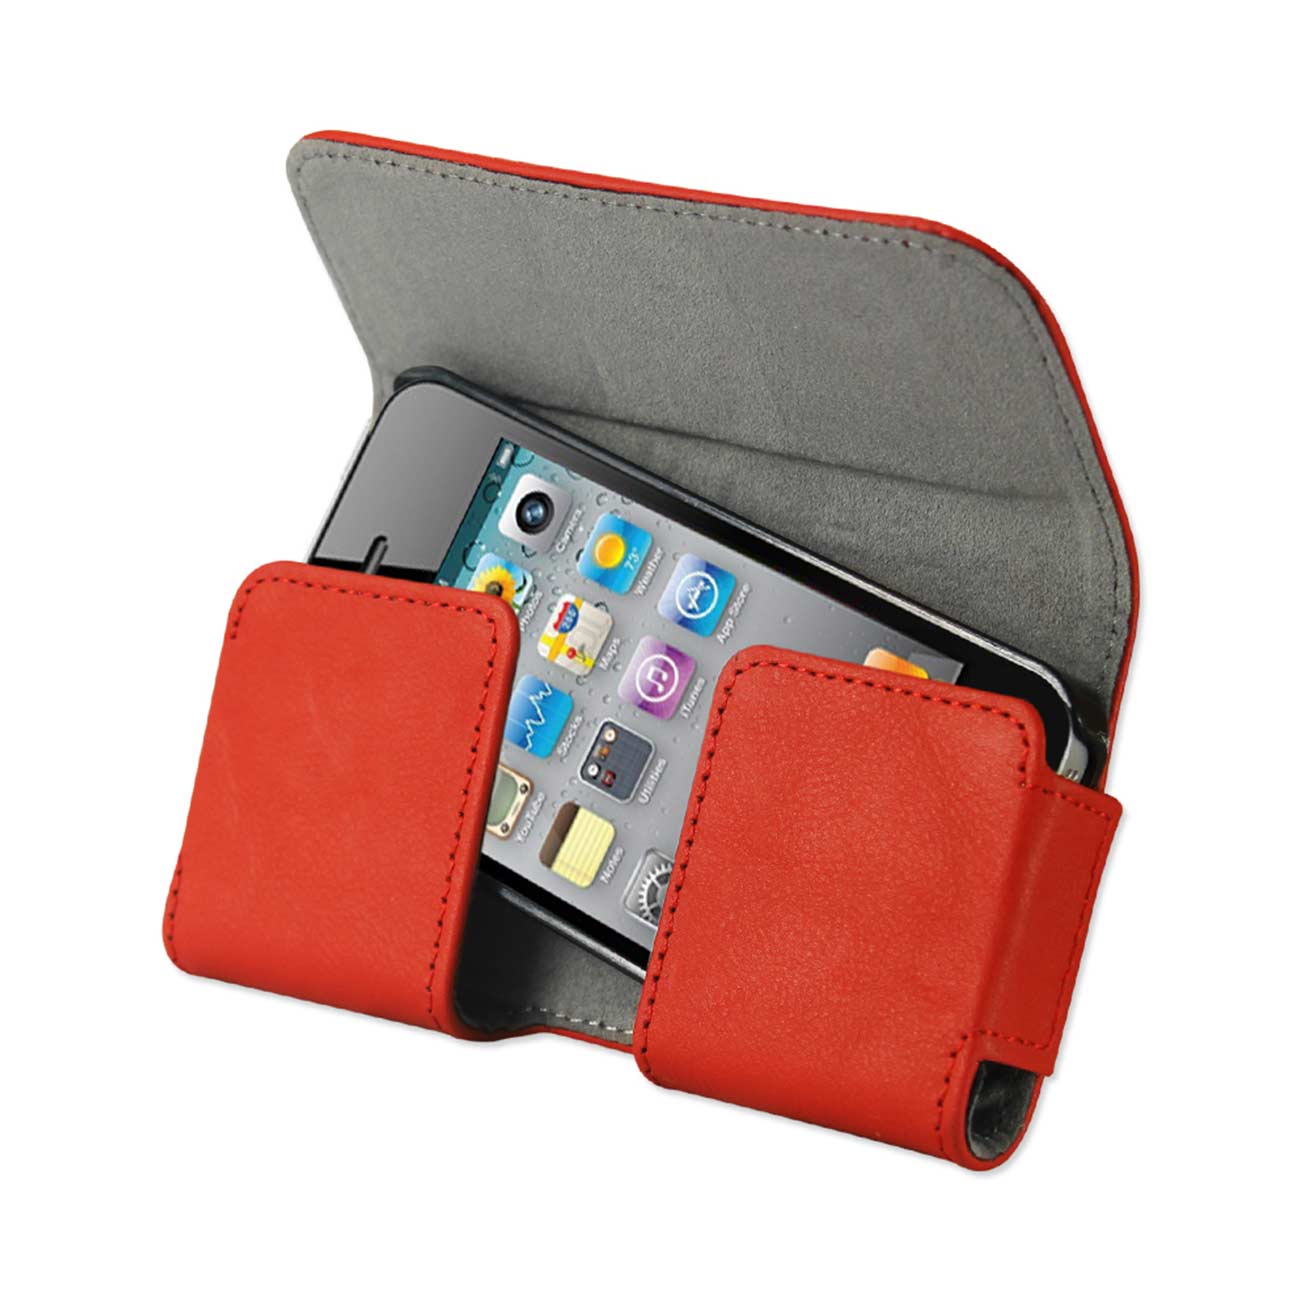 Horizontal Pouch With Easy Take Out Design Samsung Galaxy S Iii I9300 Plus Orange - image 2 of 3